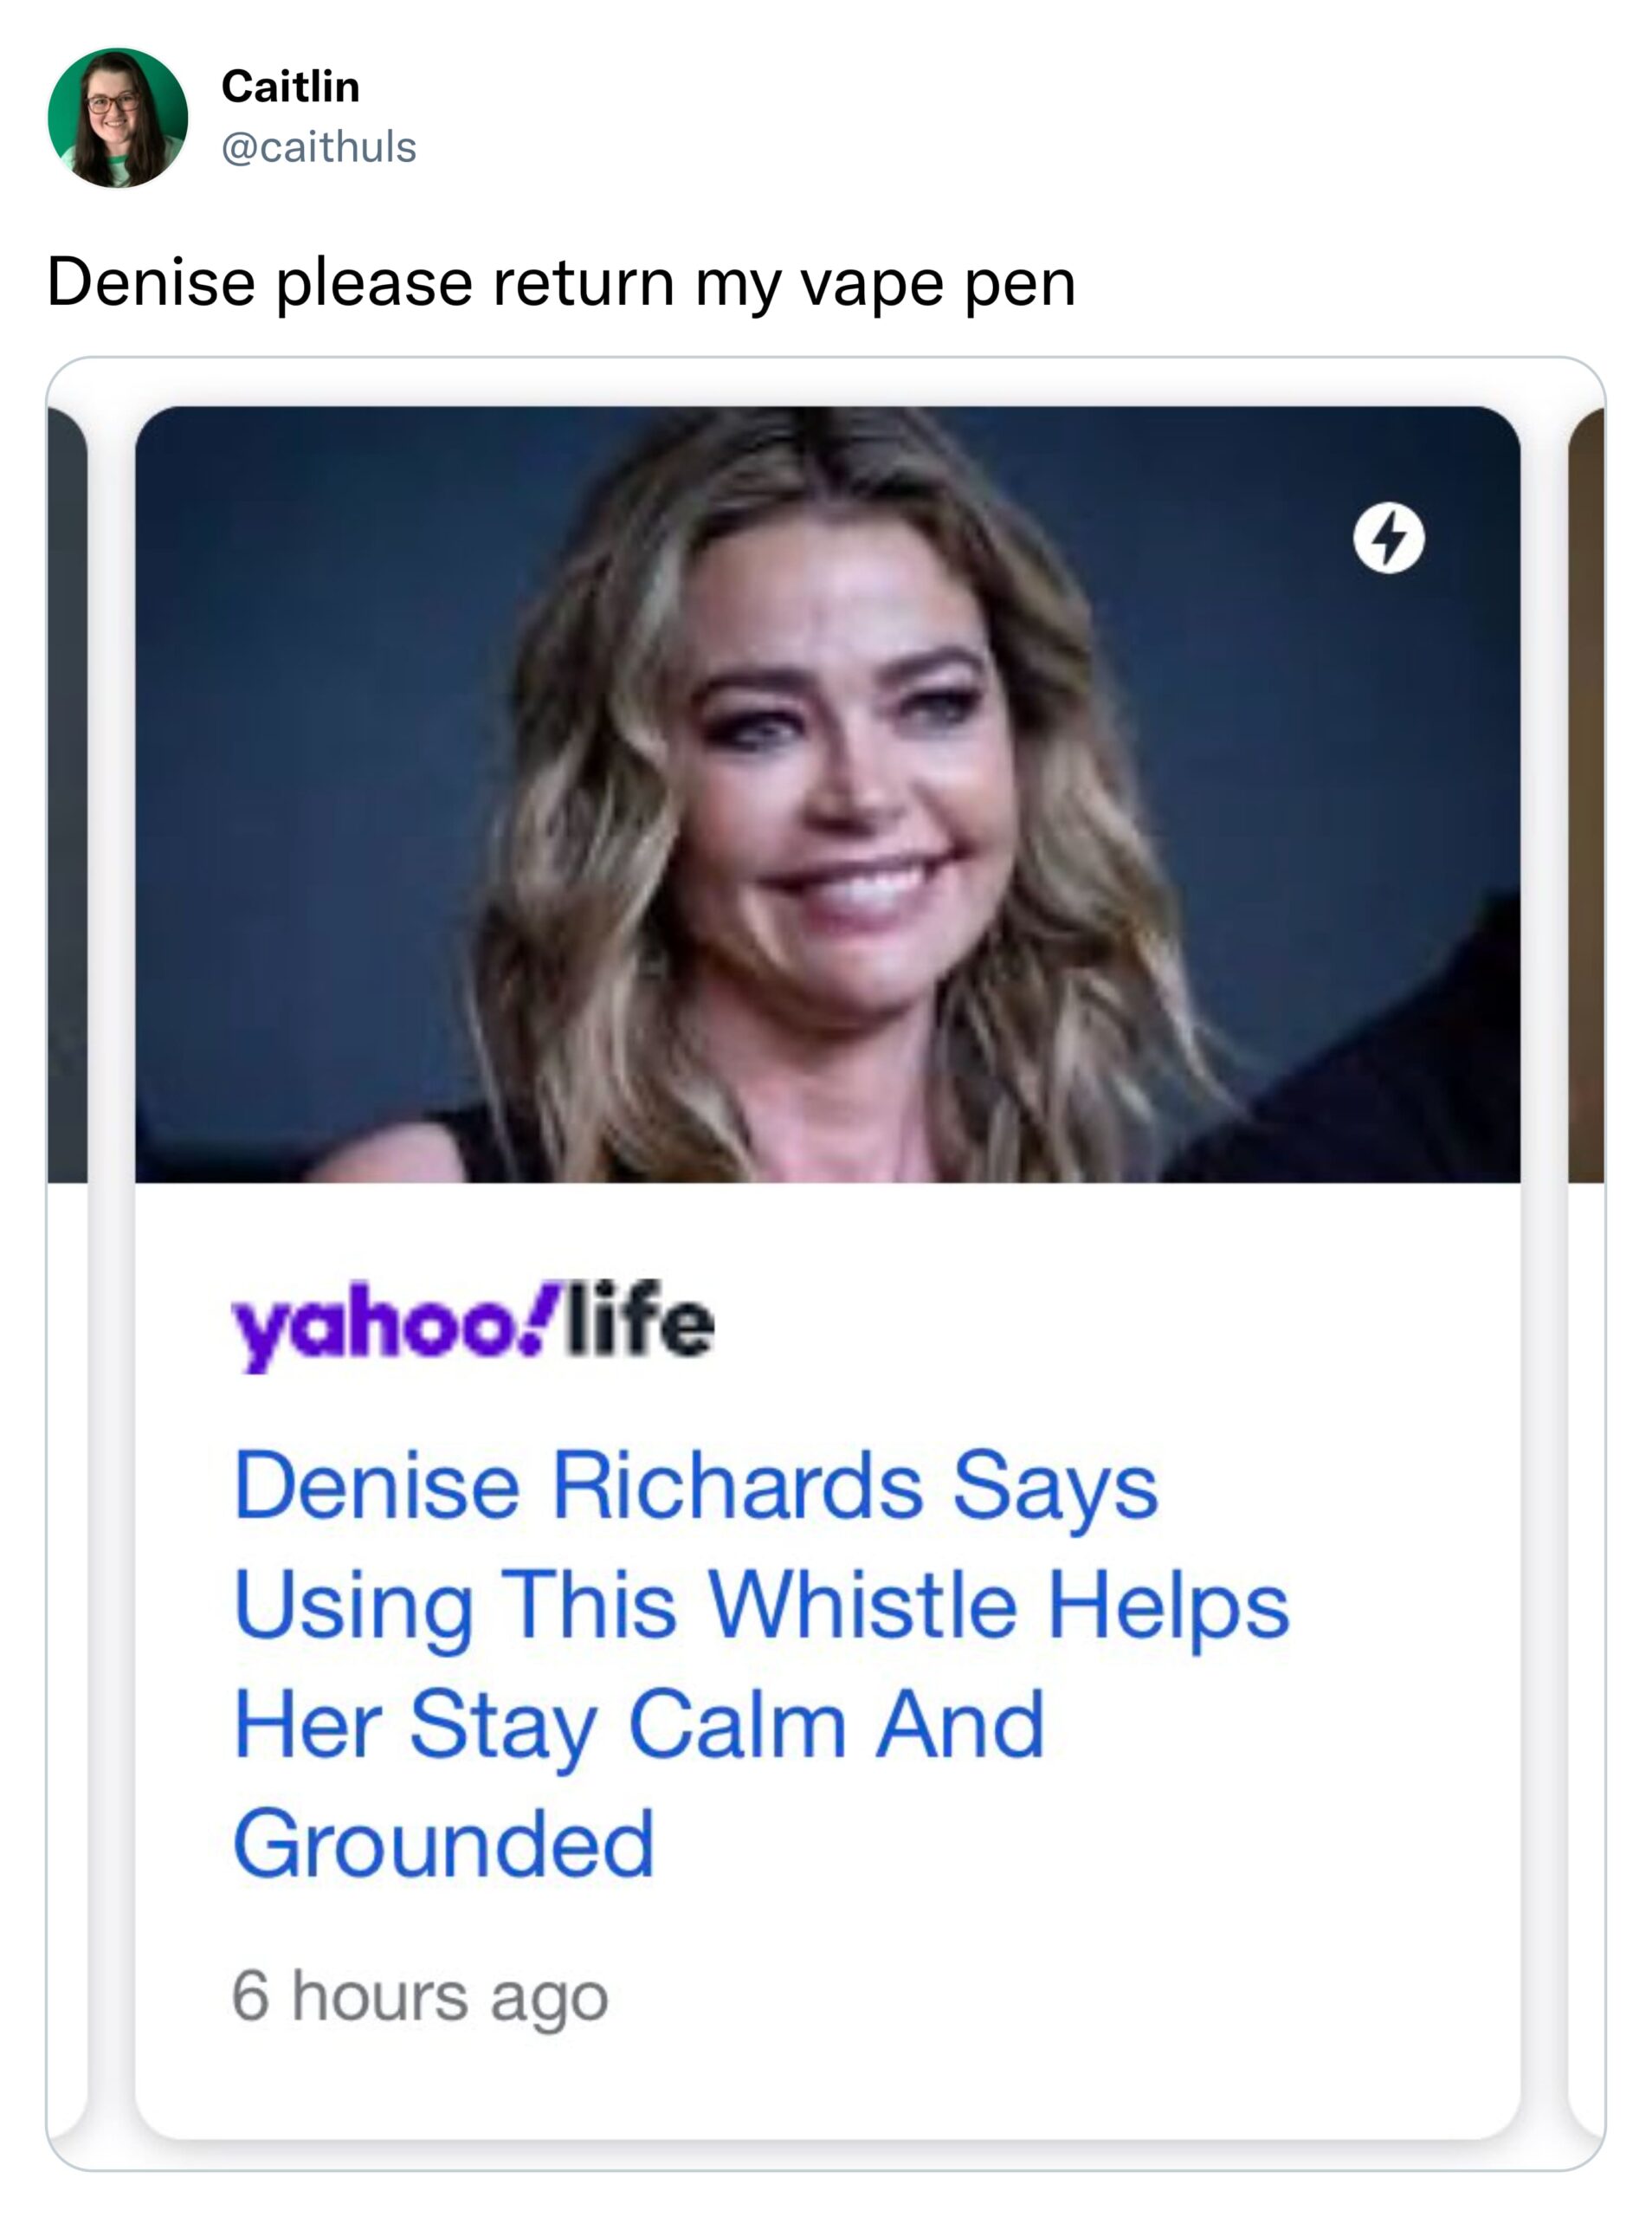 brutal comments and comebacks - photo caption - Caitlin Denise please return my vape pen yahoo.life Denise Richards Says Using This Whistle Helps Her Stay Calm And Grounded 6 hours ago 4